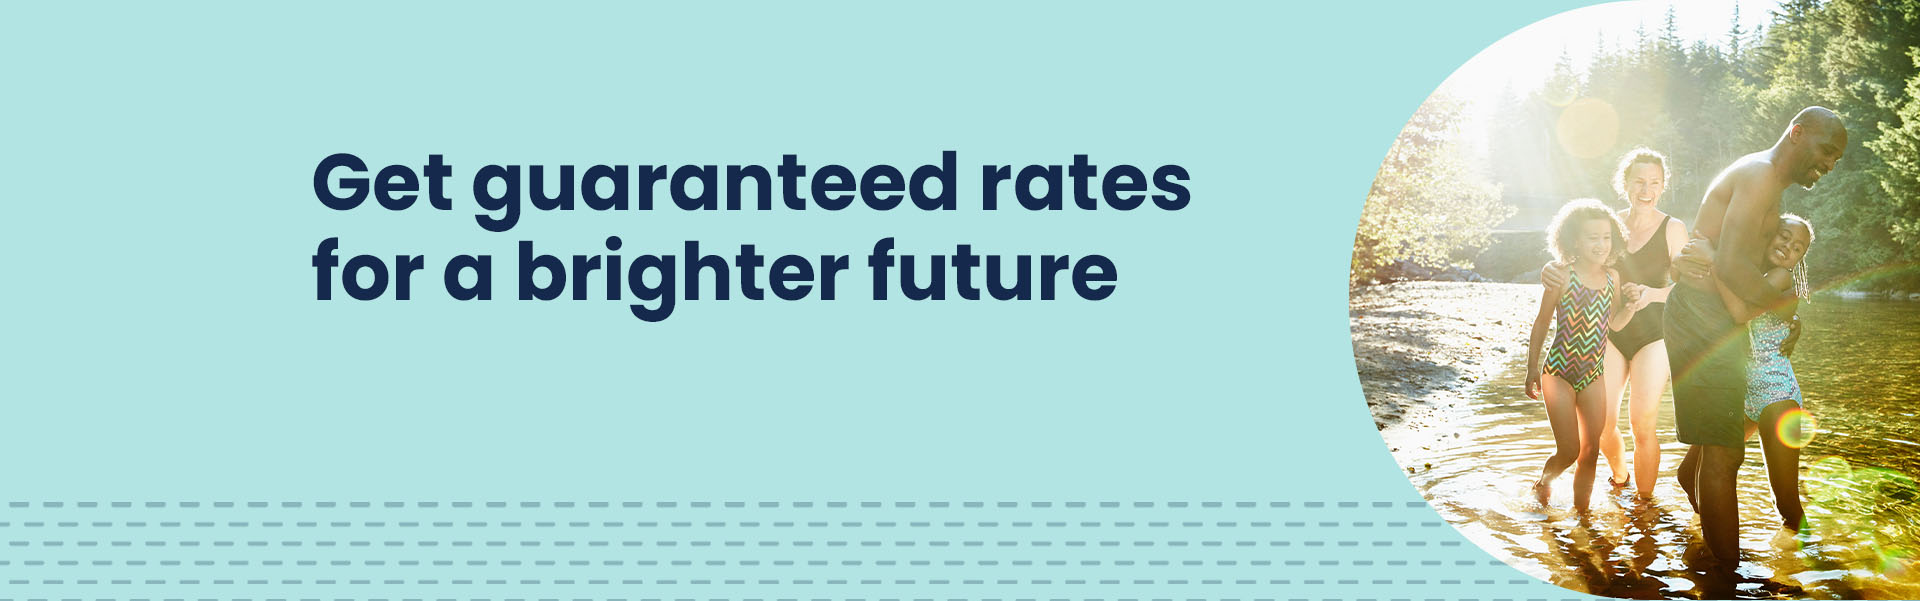 Get guaranteed rates for a brighter future